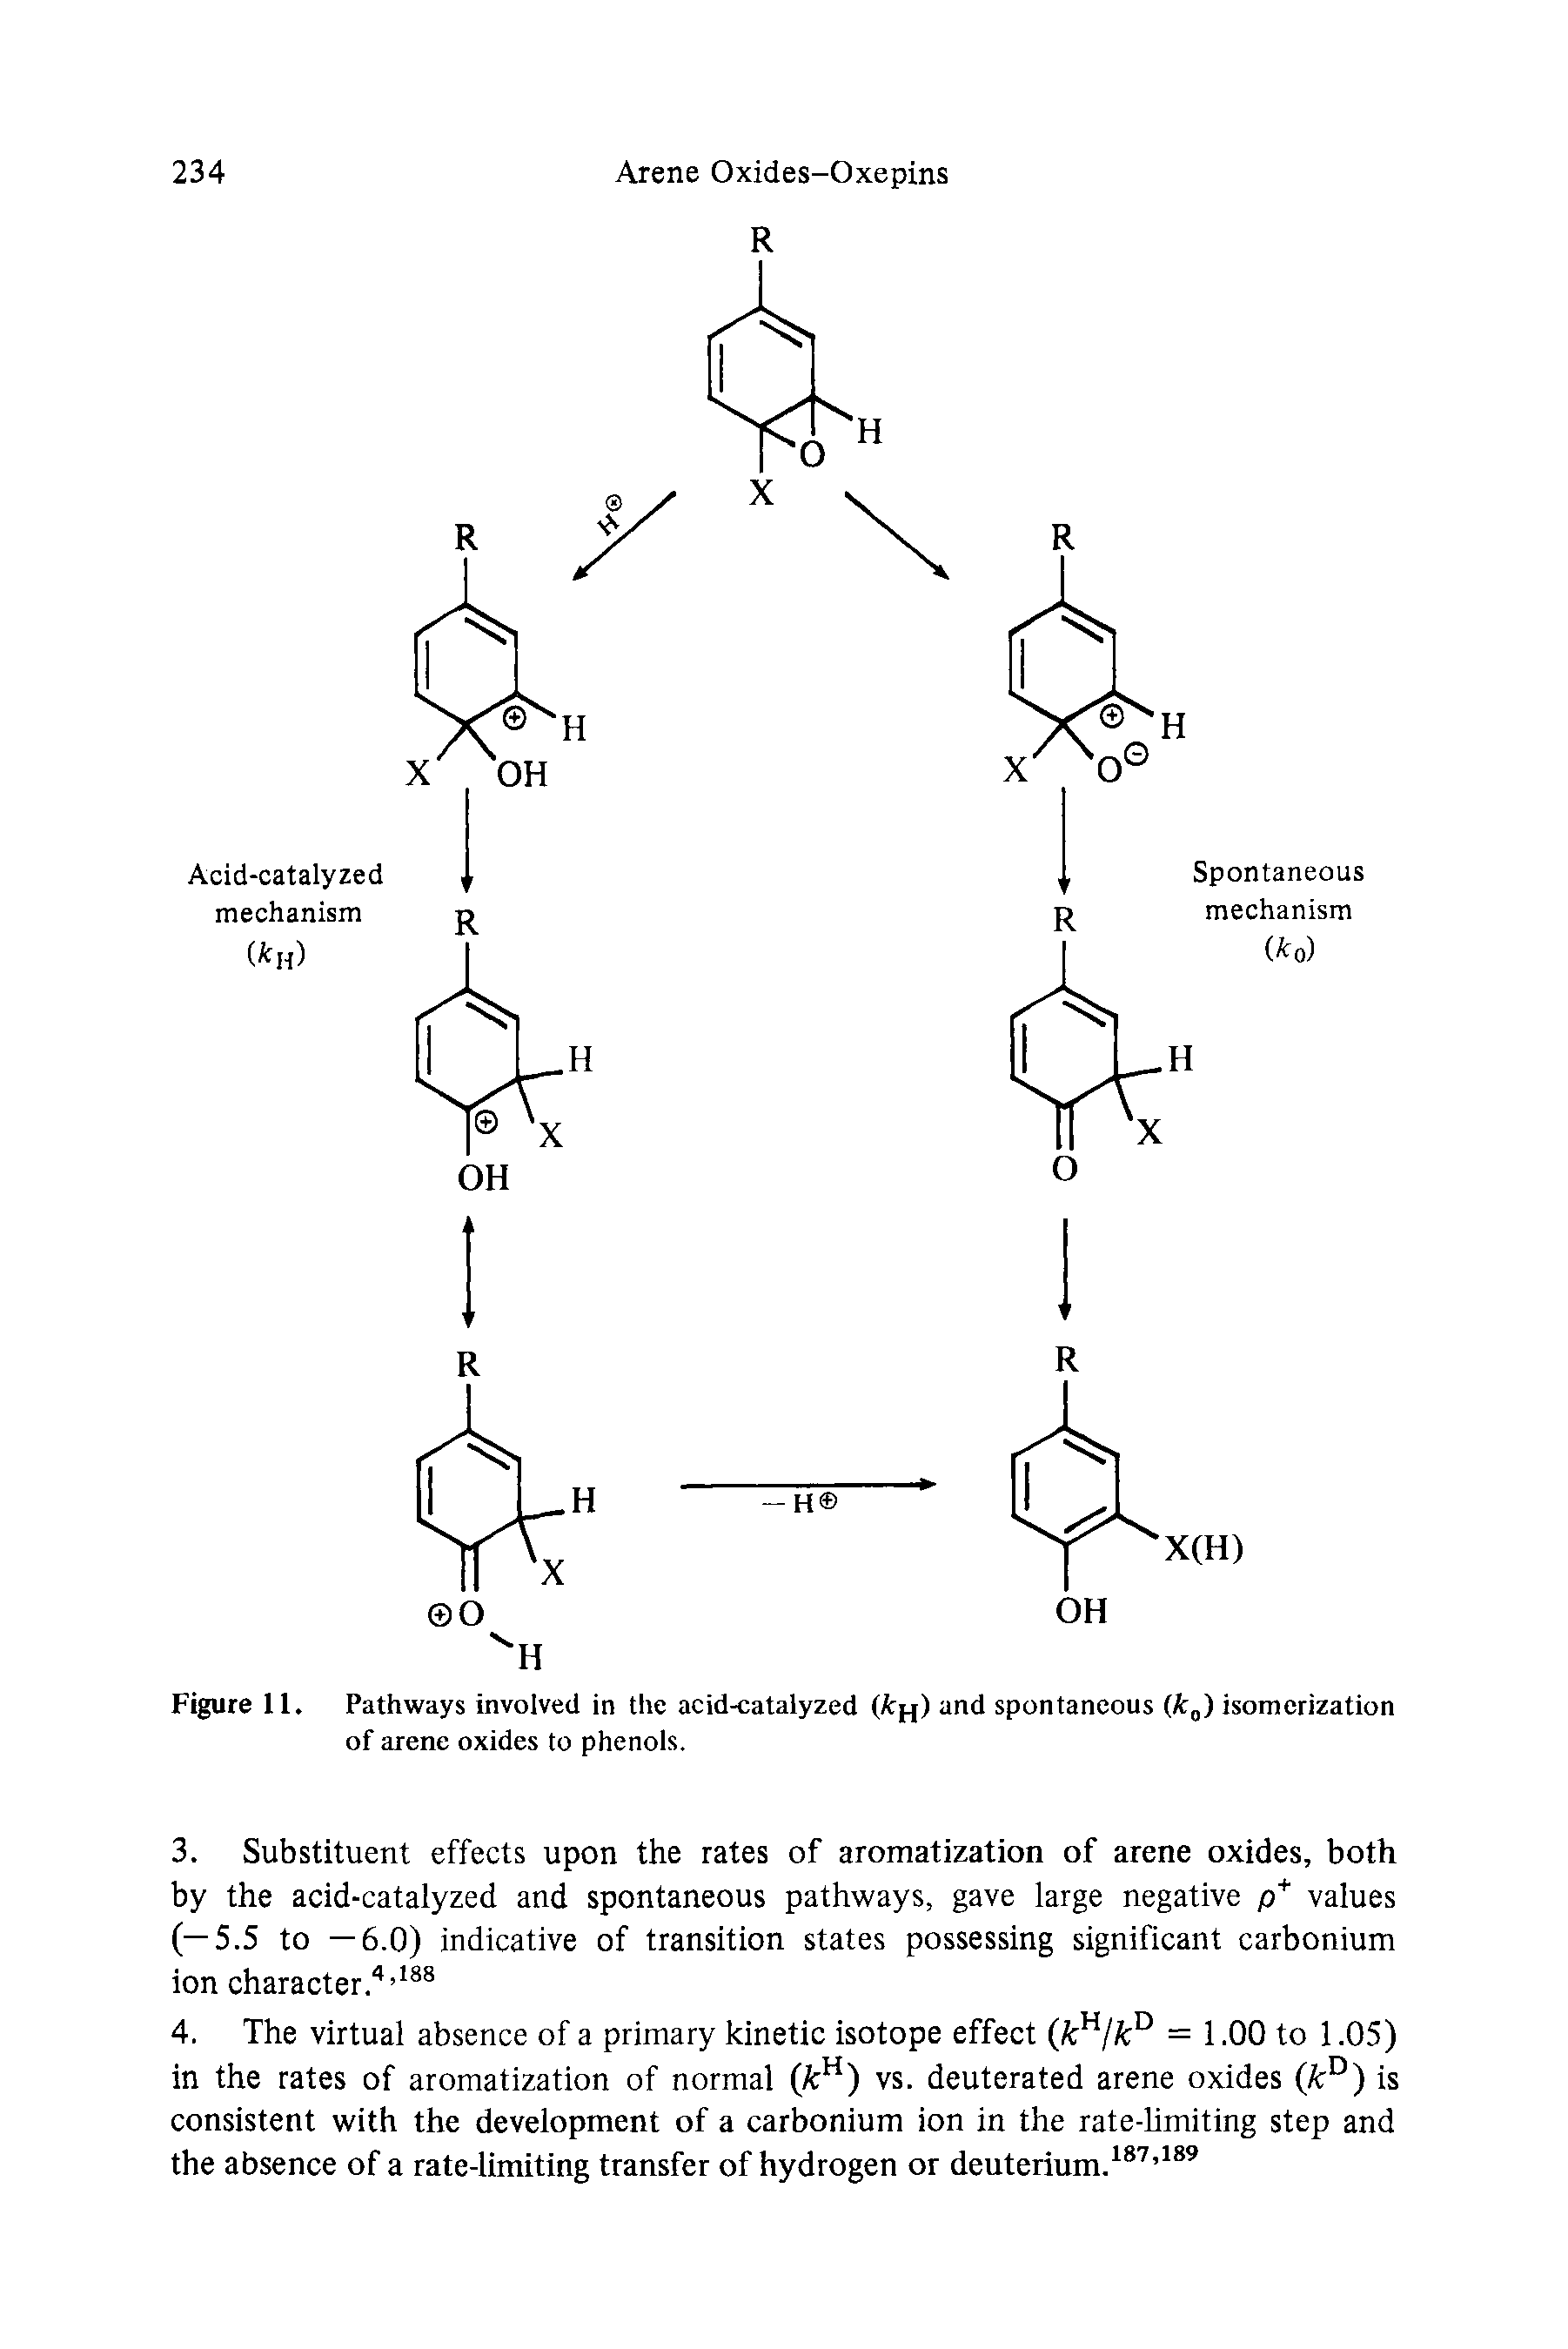 Figure 11. Pathways involved in the acid-catalyzed and spontaneous (k i isomerization of arene oxides to phenols.